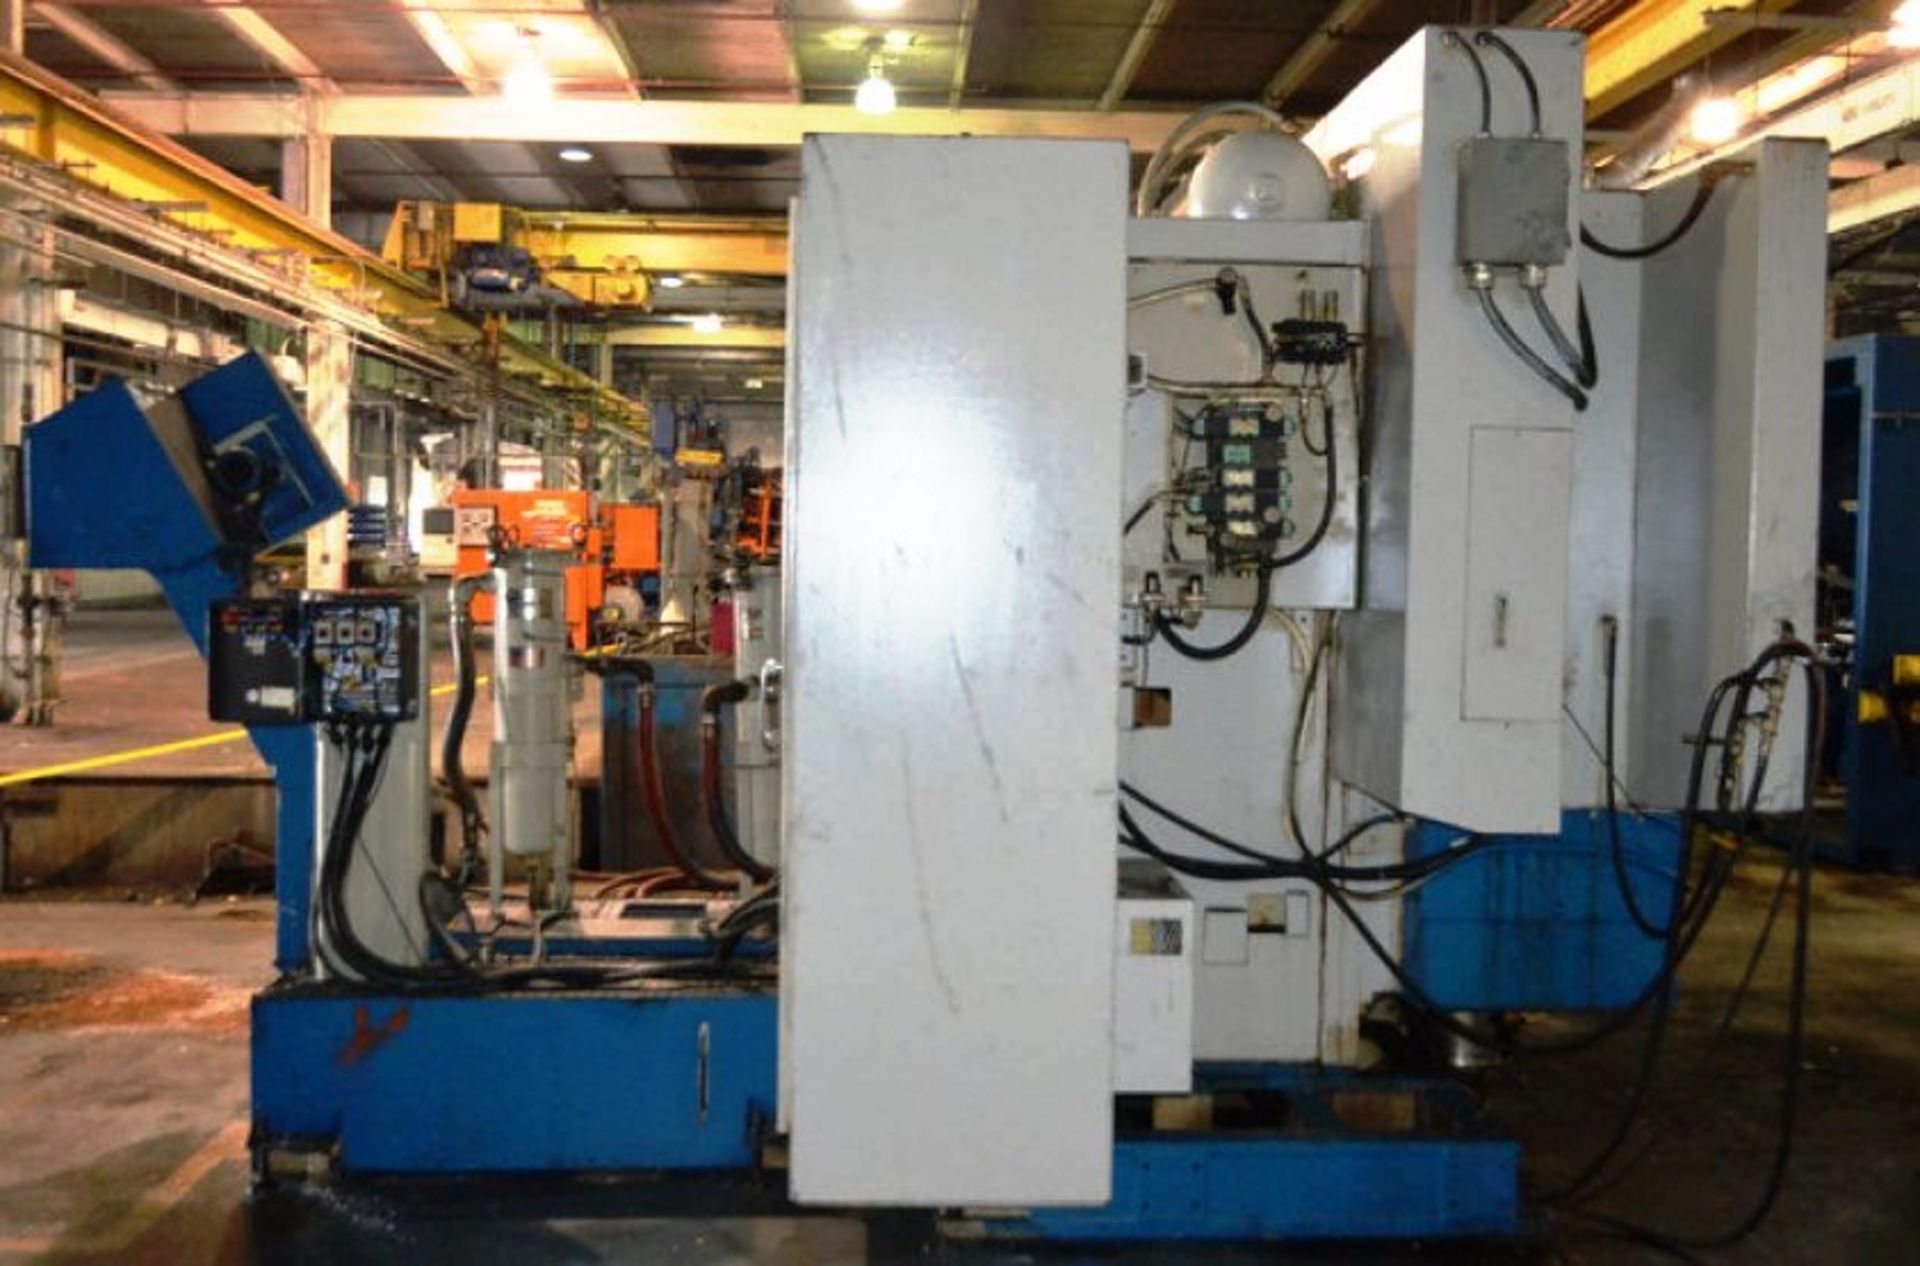 Olofsson Model M2075E Twin Spindle Vertical CNC Turning Center - Image 6 of 9